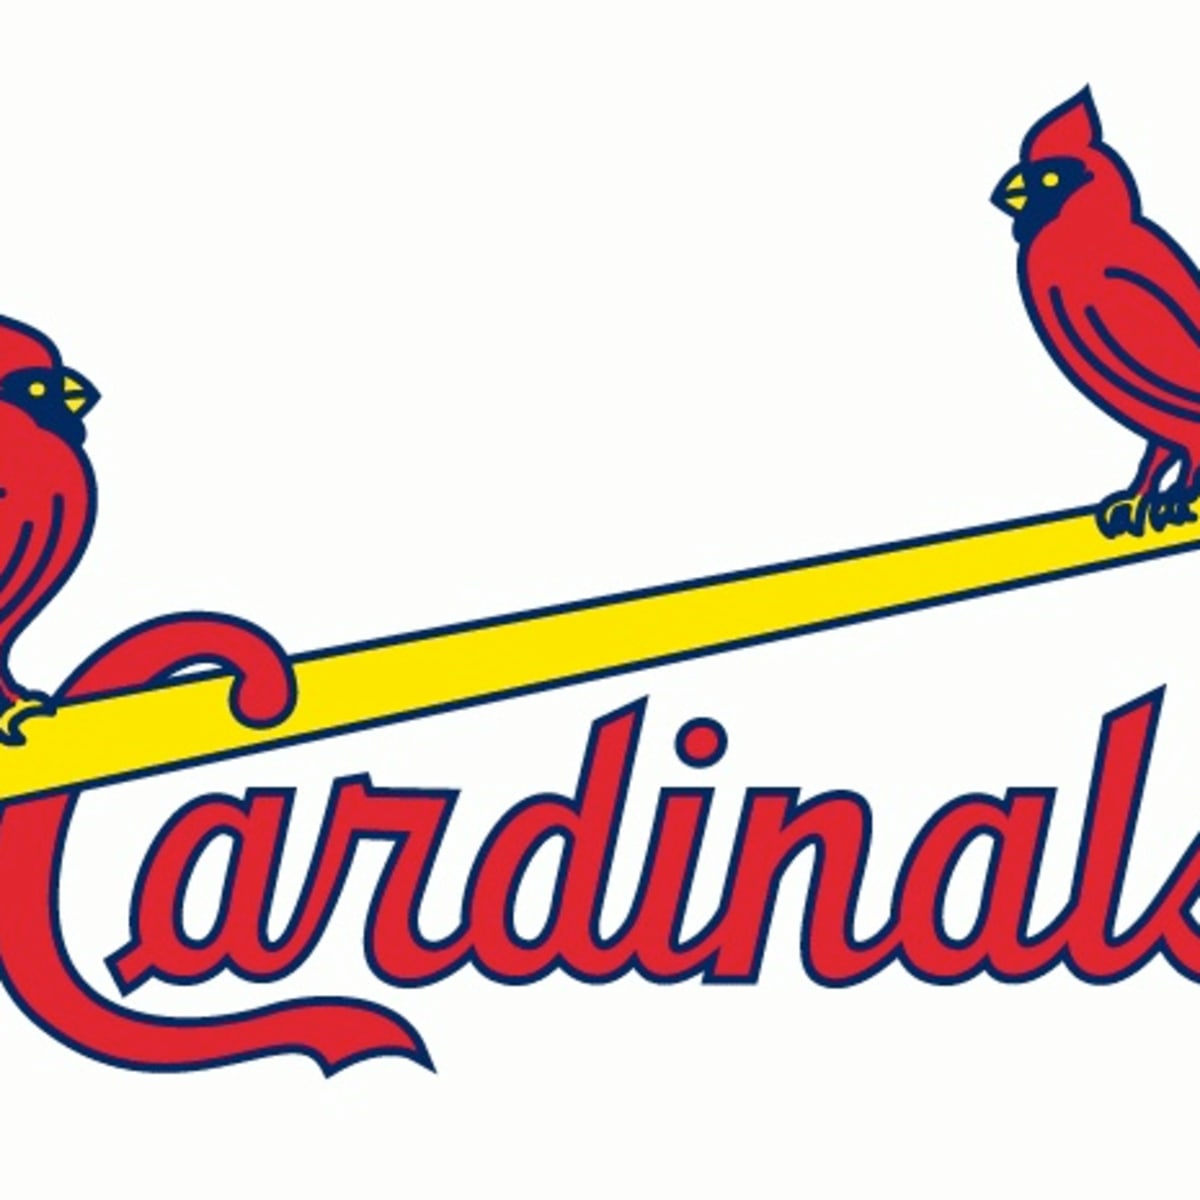 5 St. Louis Cardinals who don't deserve to make the 40-man roster